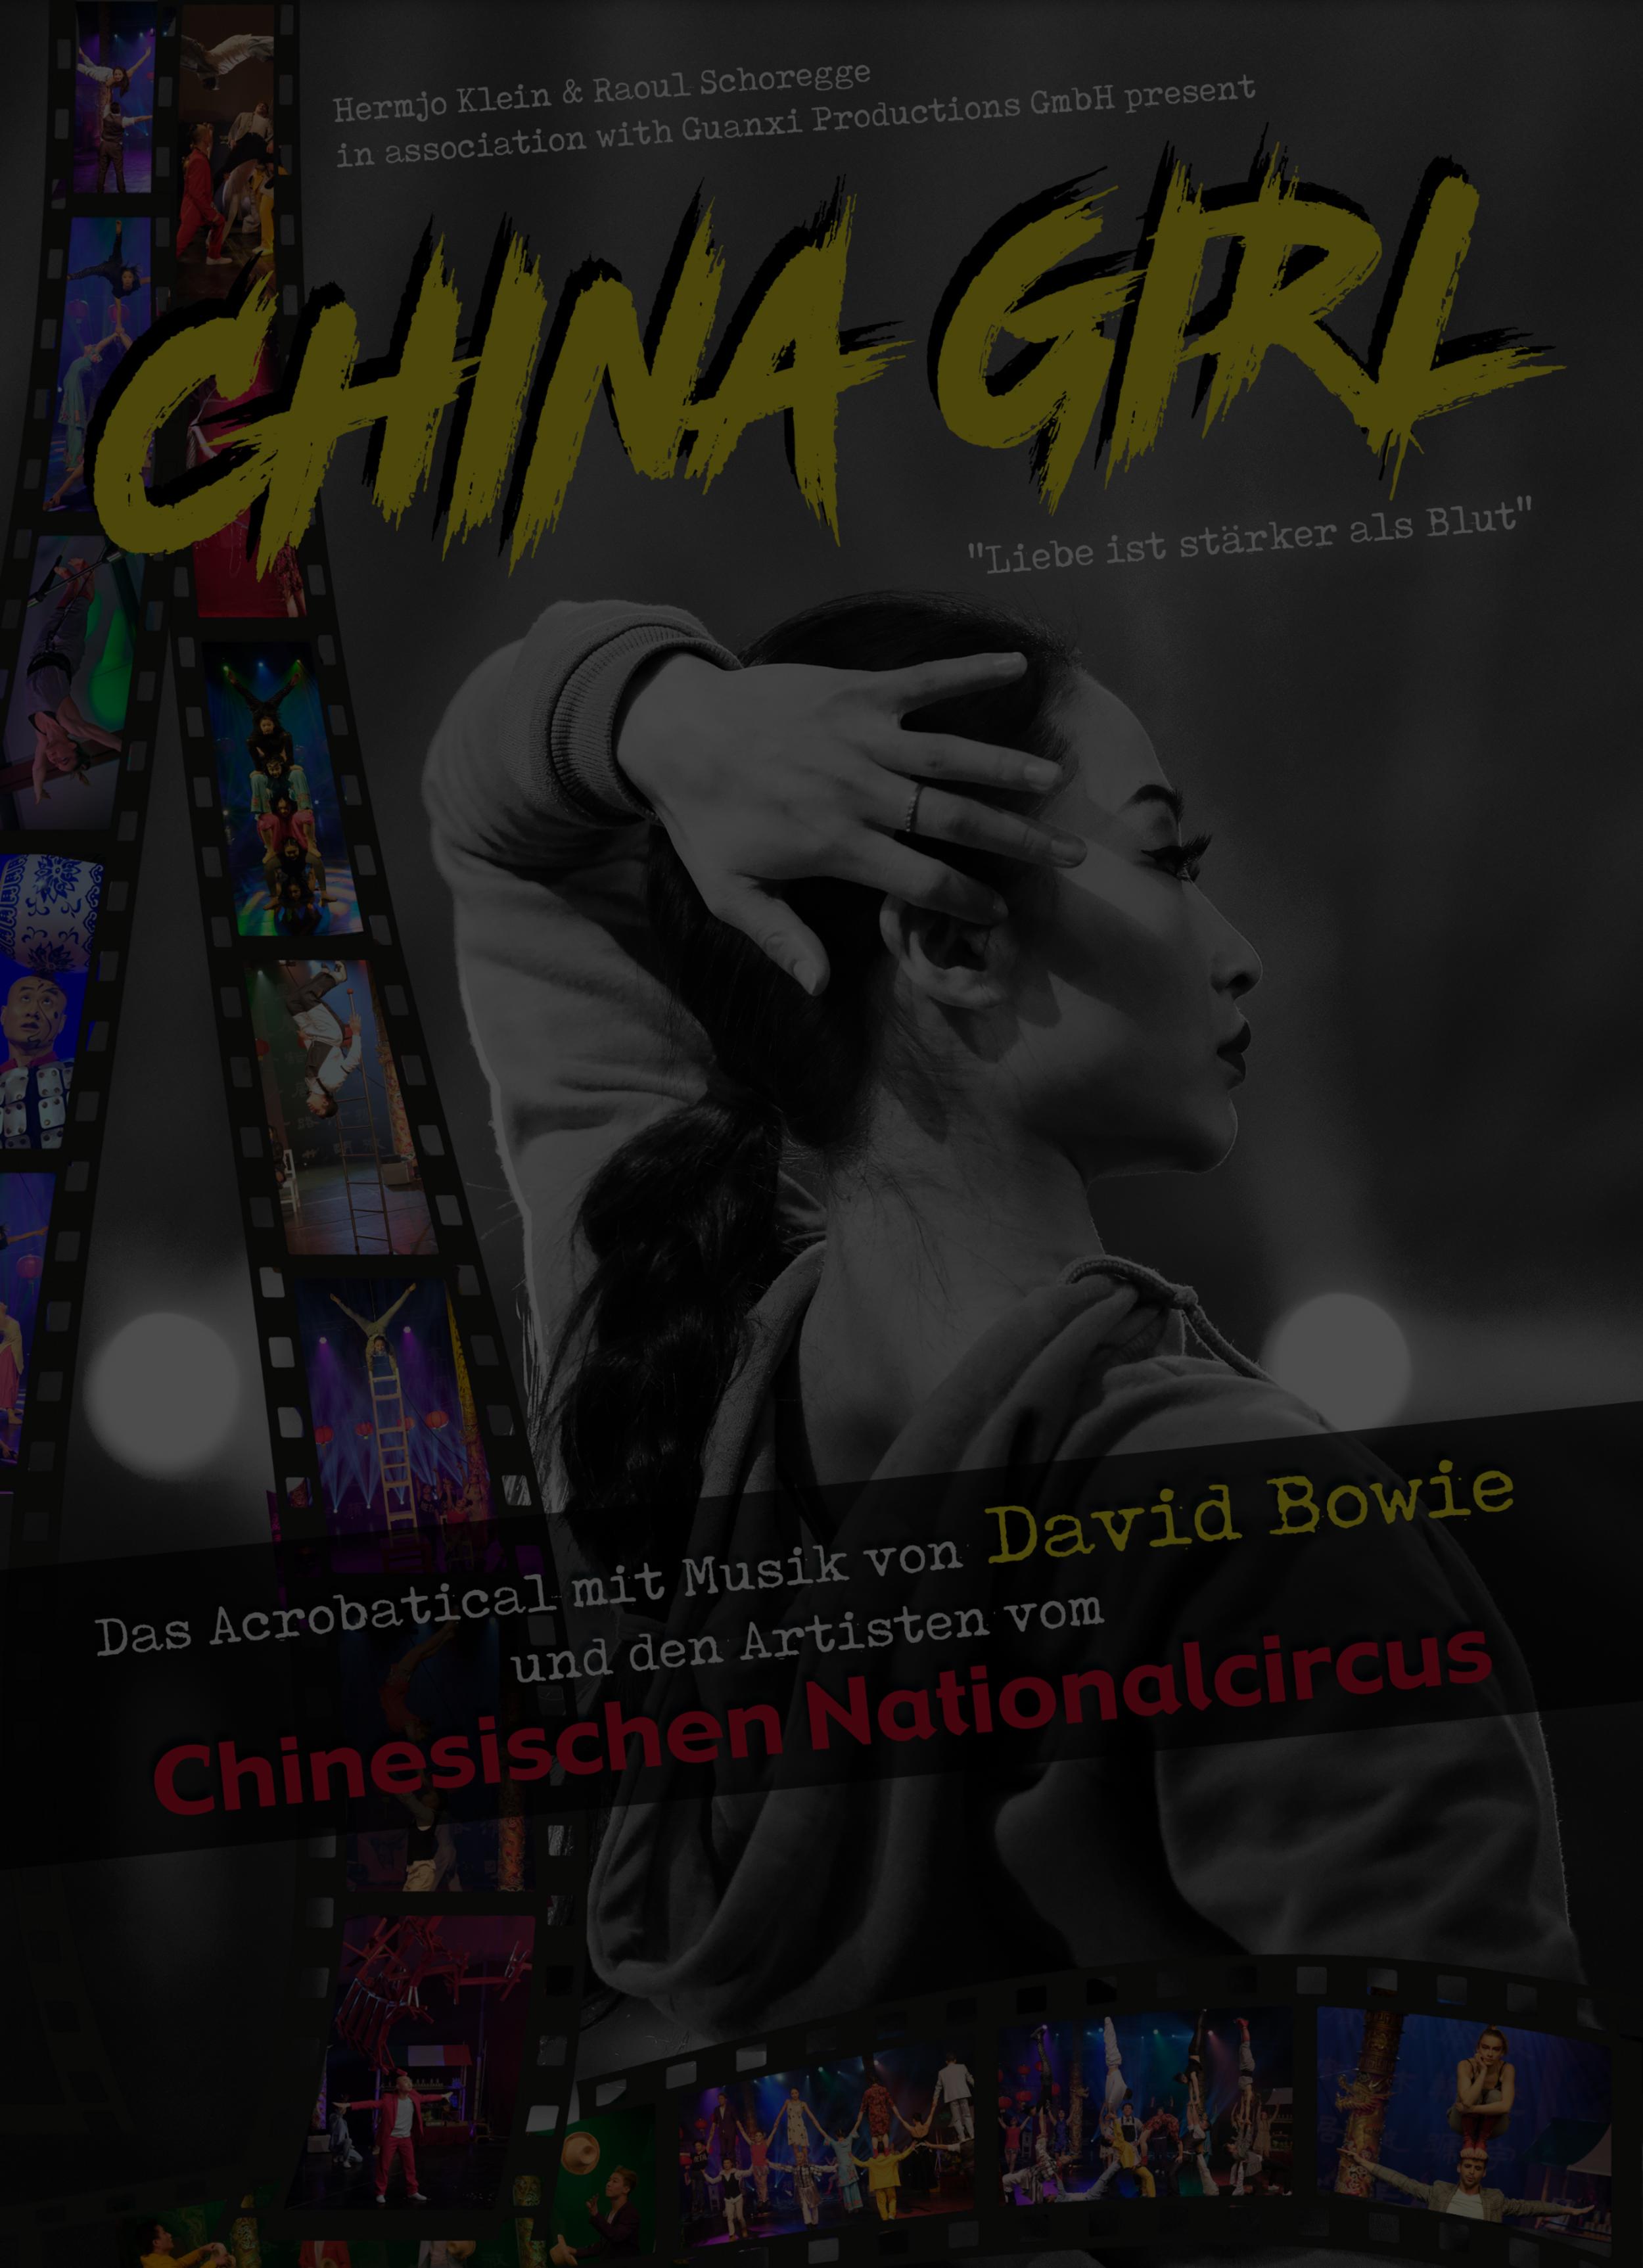 CHINA GIRL „Love is stronger than blood!“